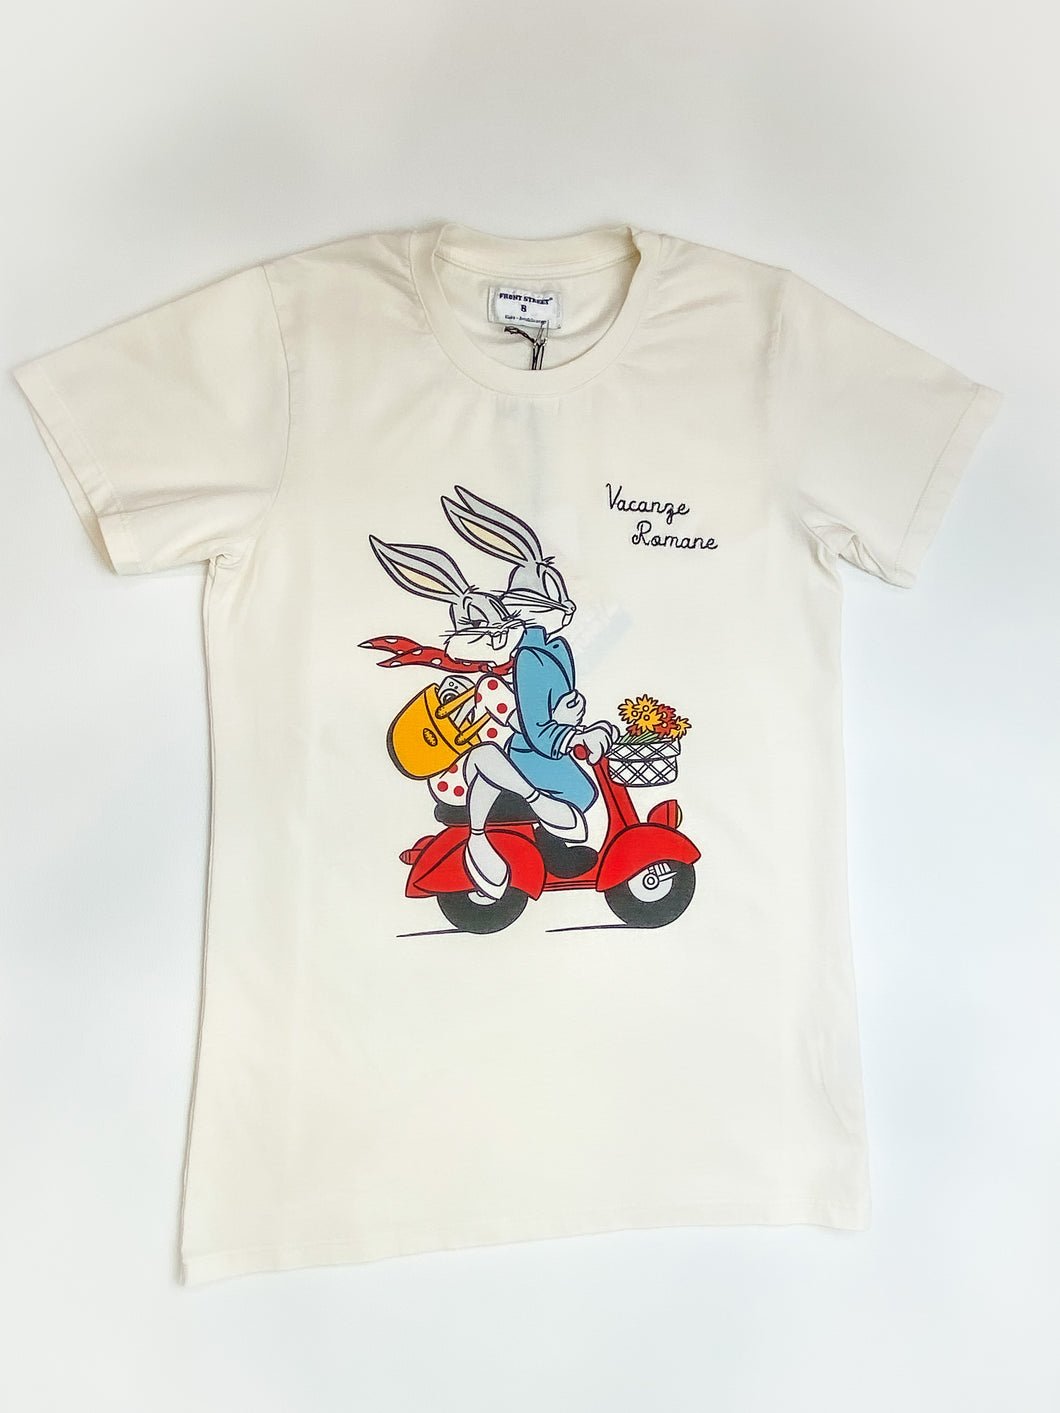 FRONT STREET 8 T-shirt Looney Tunes 